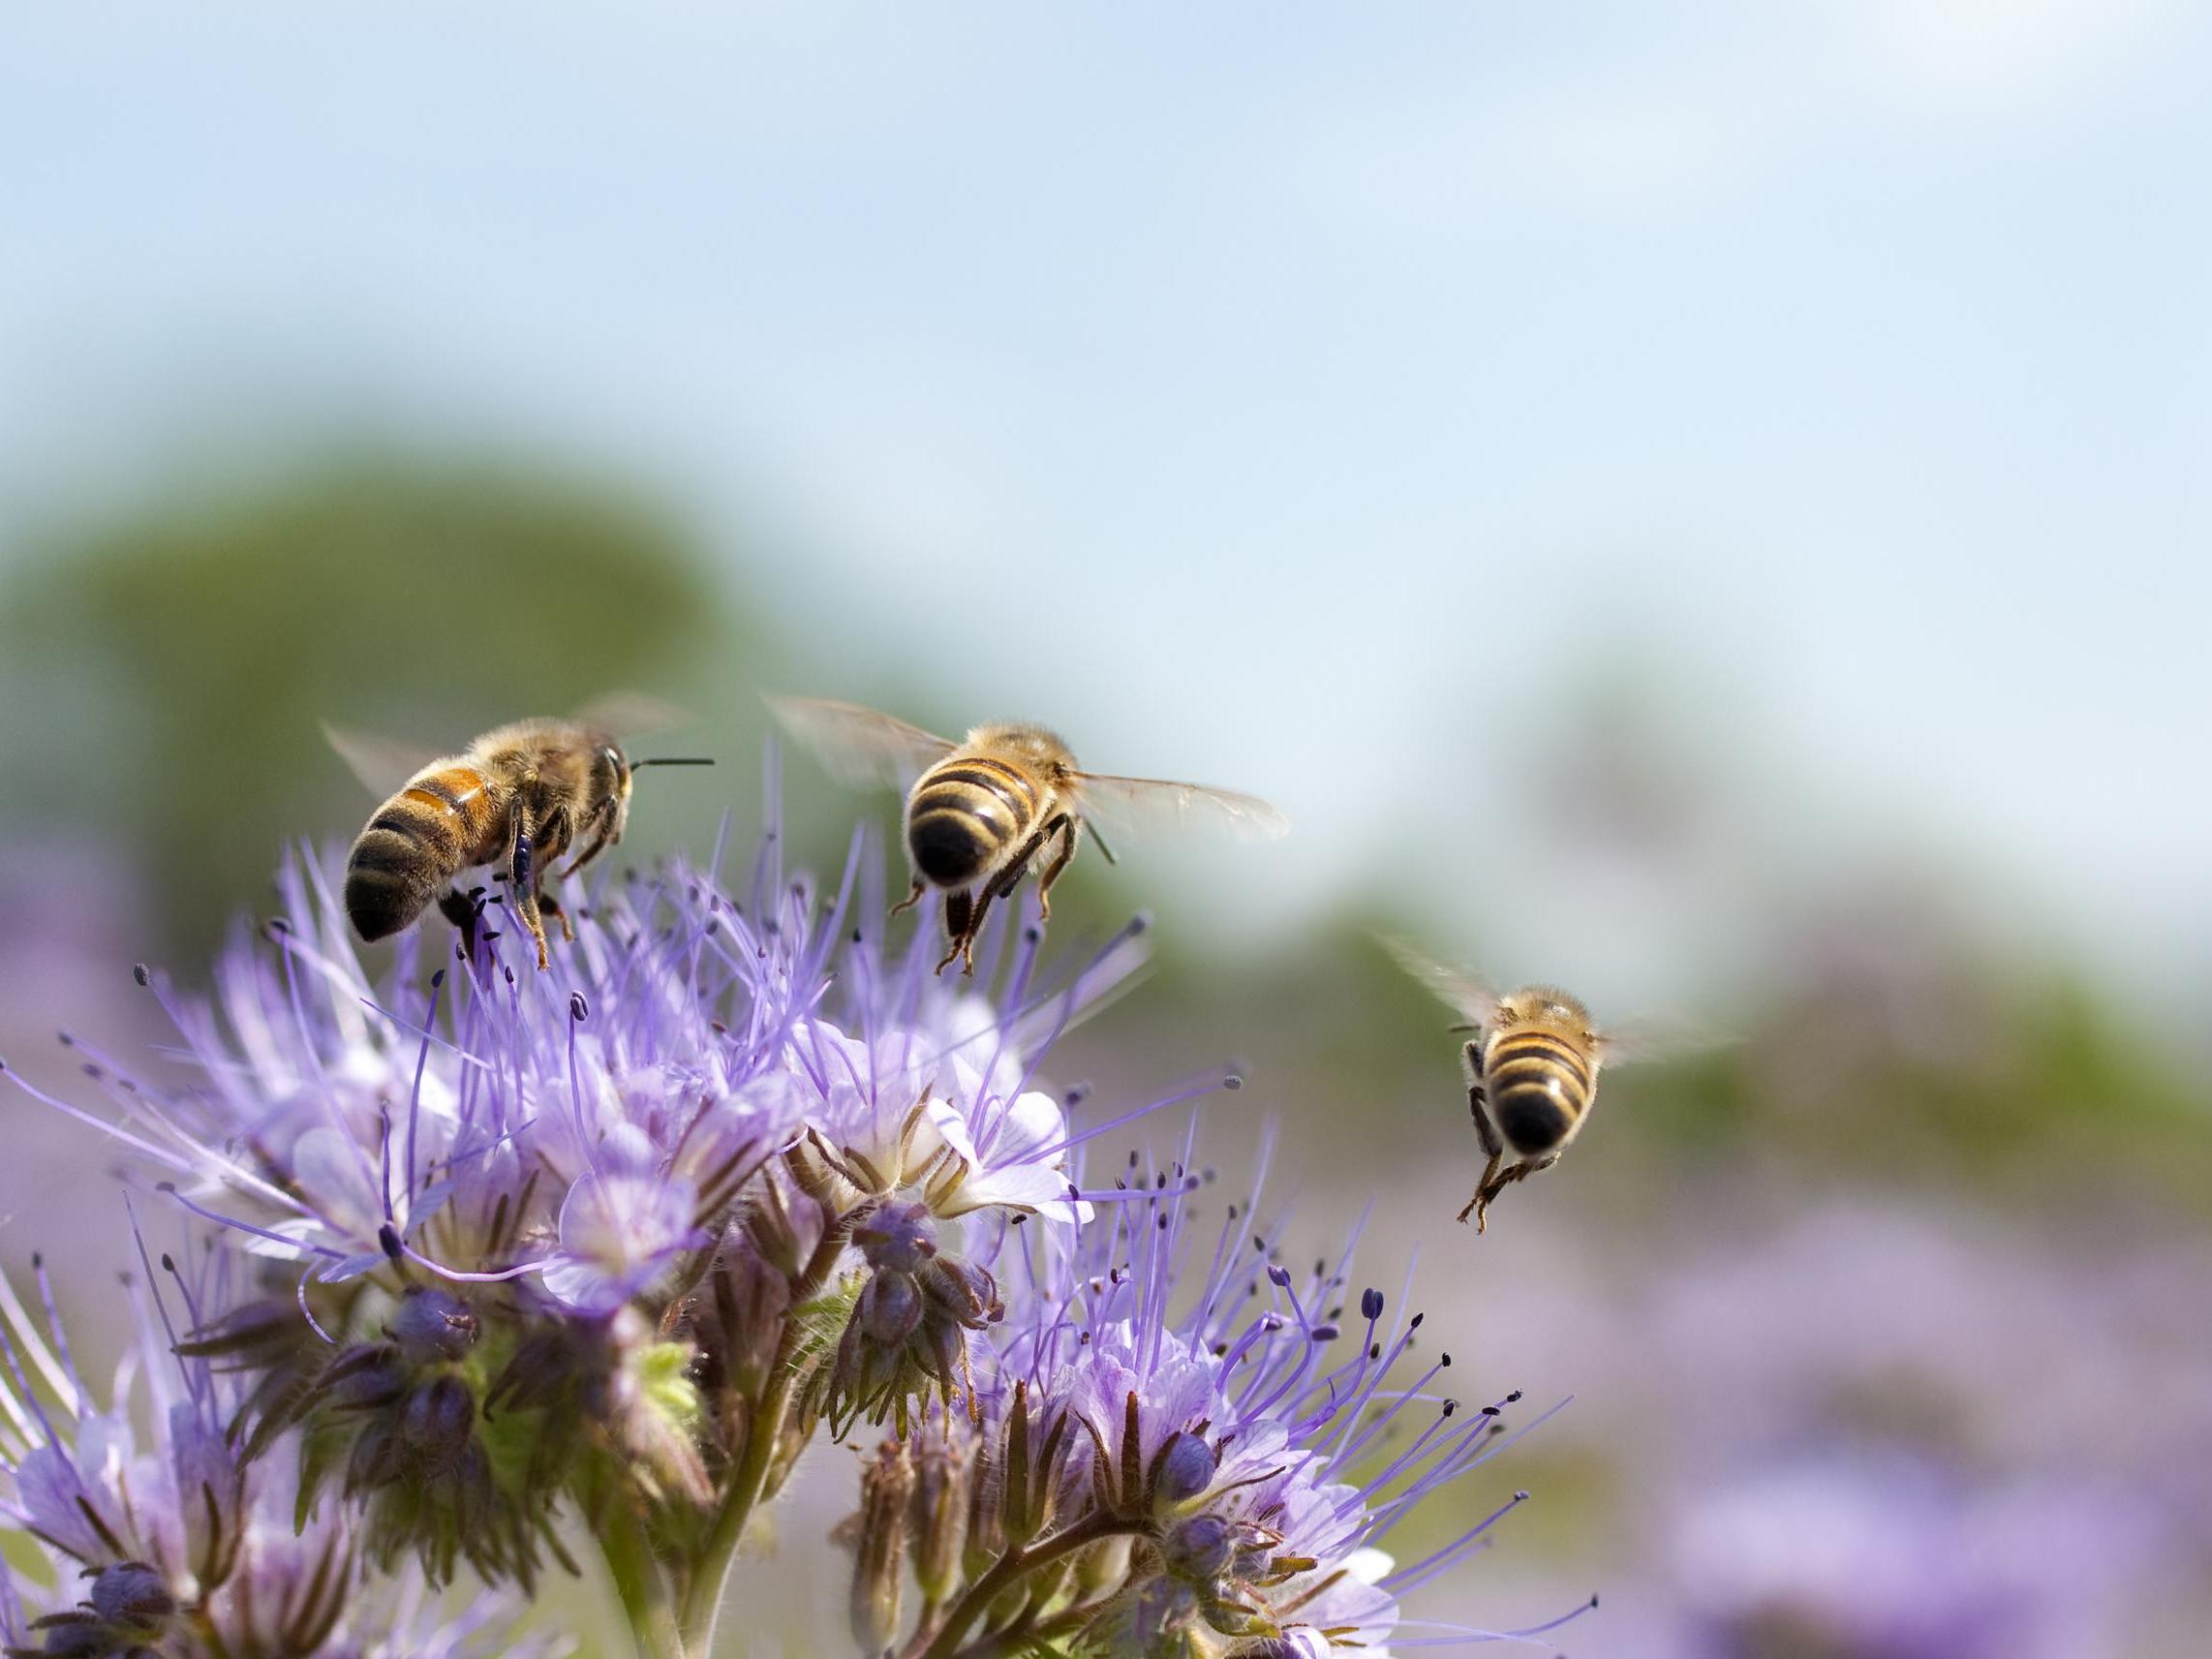 ‘Without [bees], we would have no apples, tomatoes, strawberries, peppers, cherries, chocolate, coffee, and much much more’ warned Dave Goulson, professor of biology at the University of Sussex